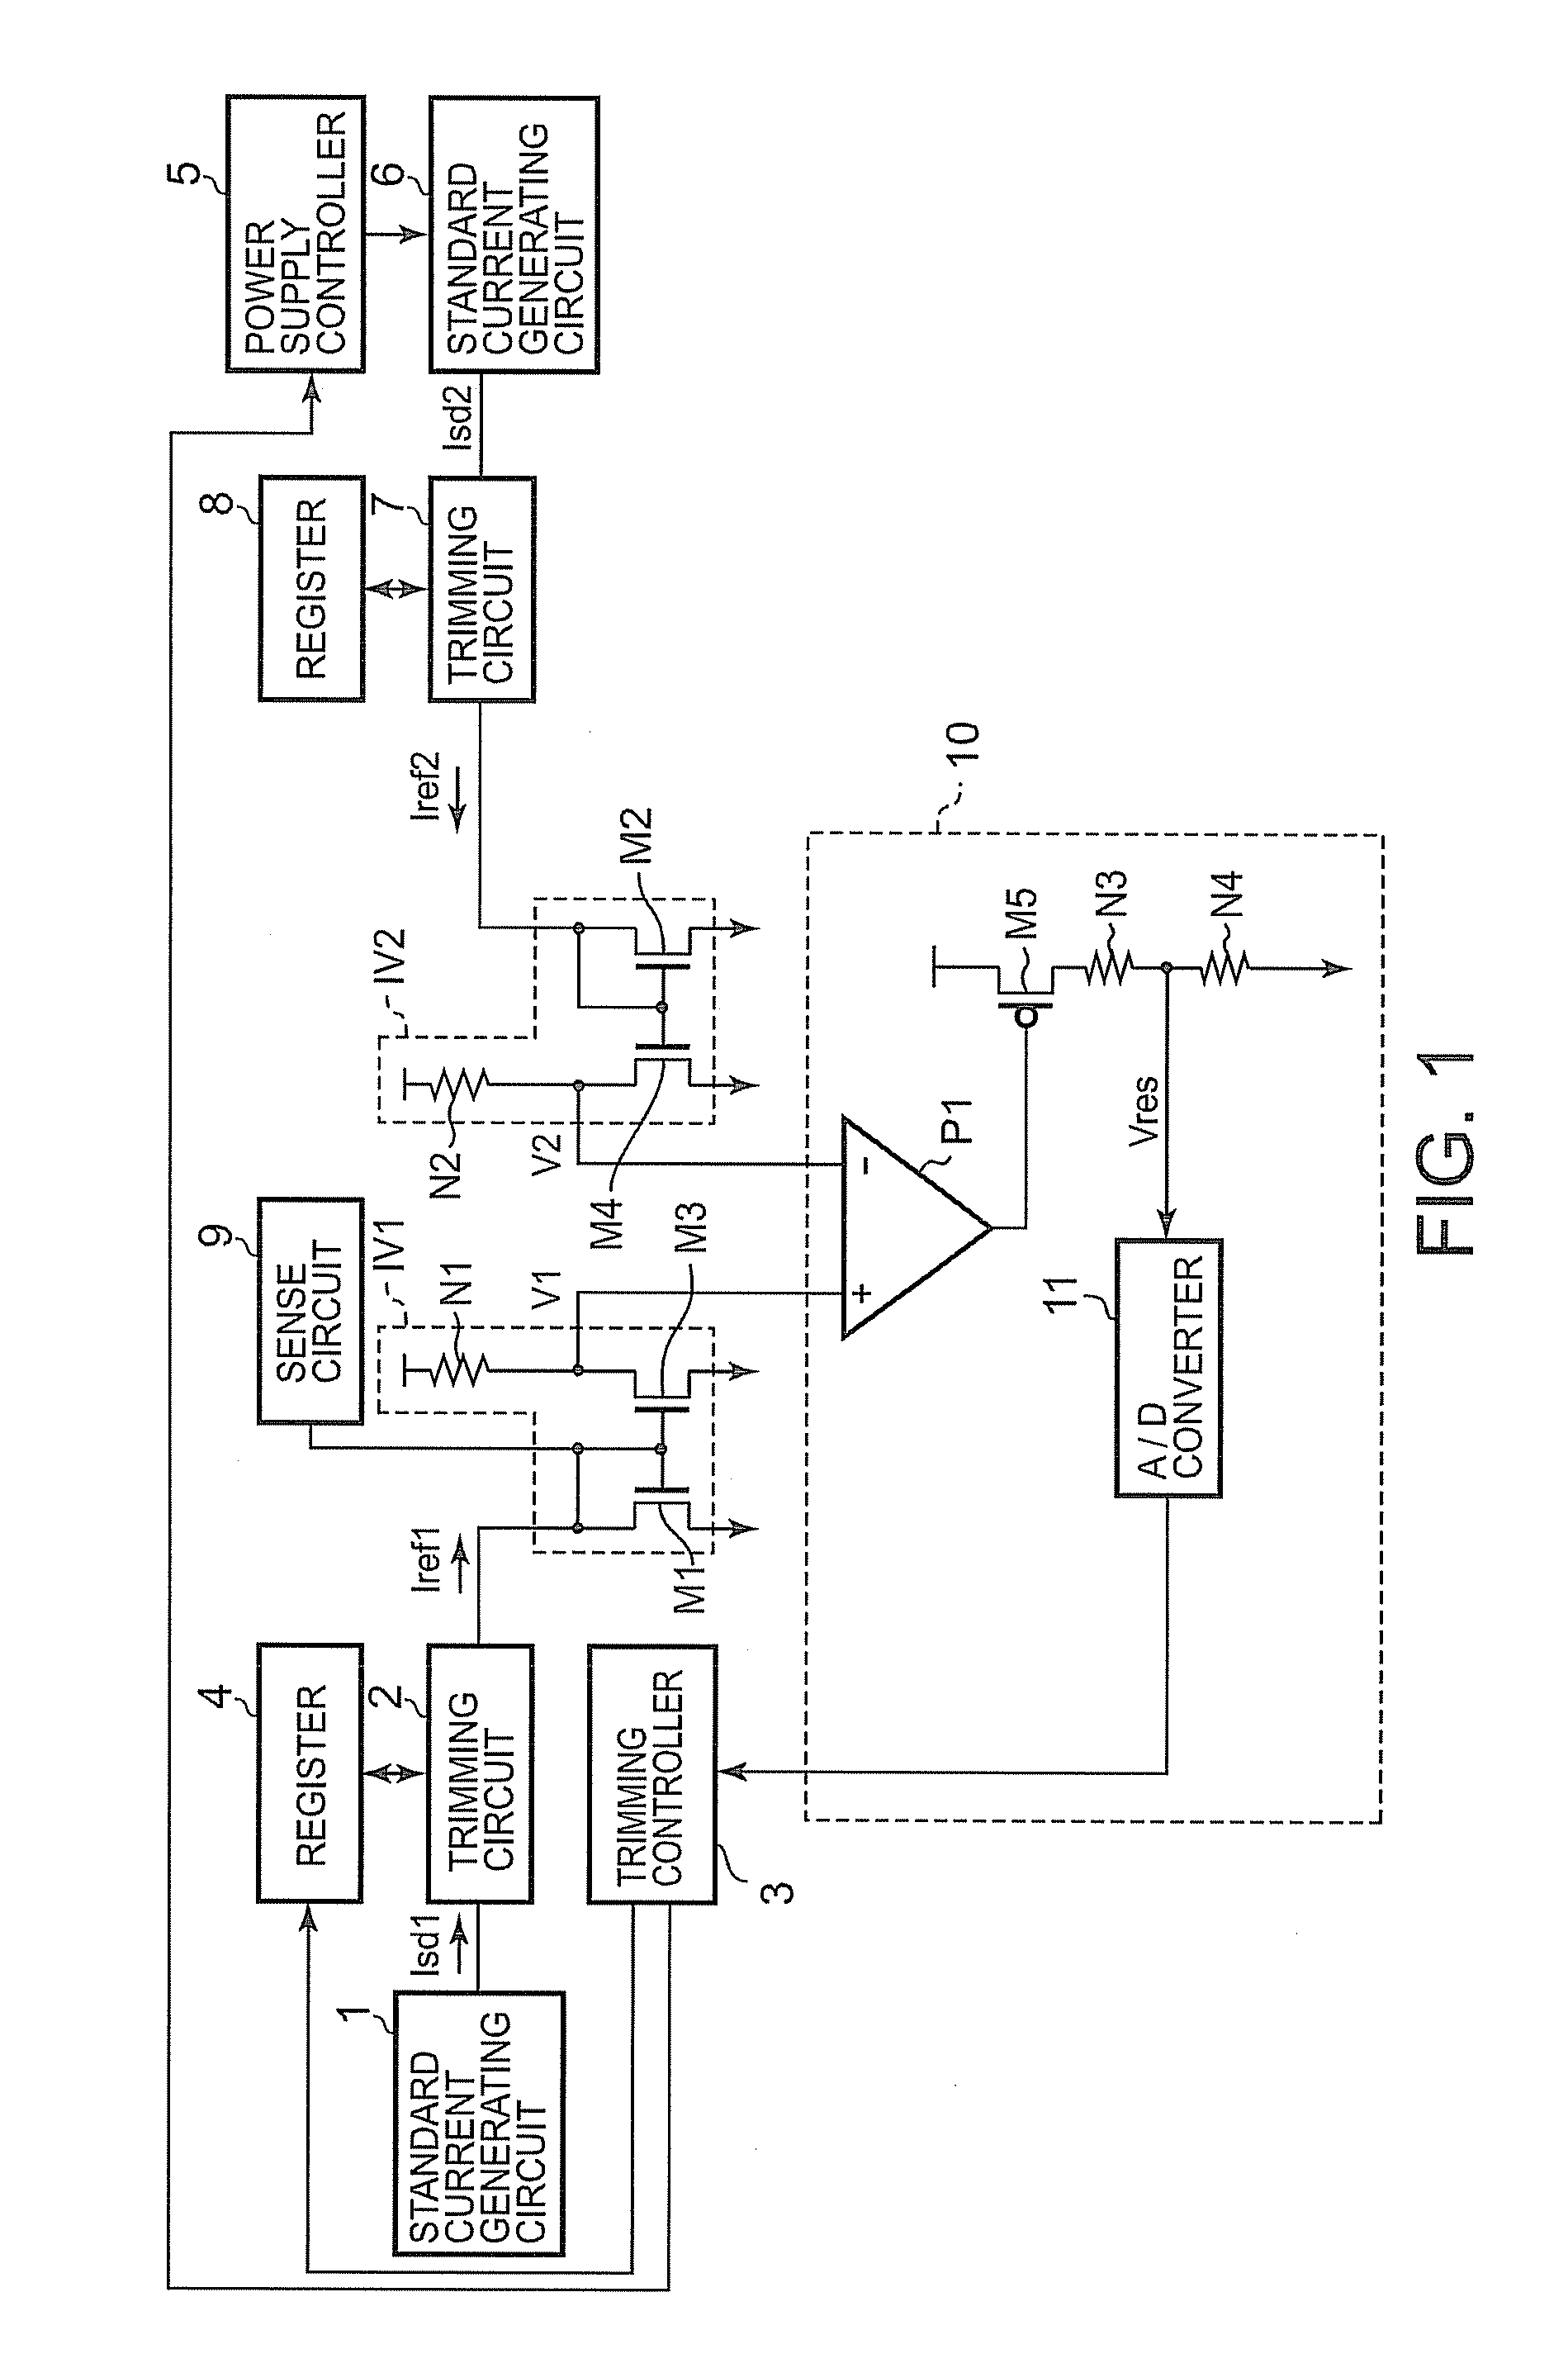 Reference current generating circuit